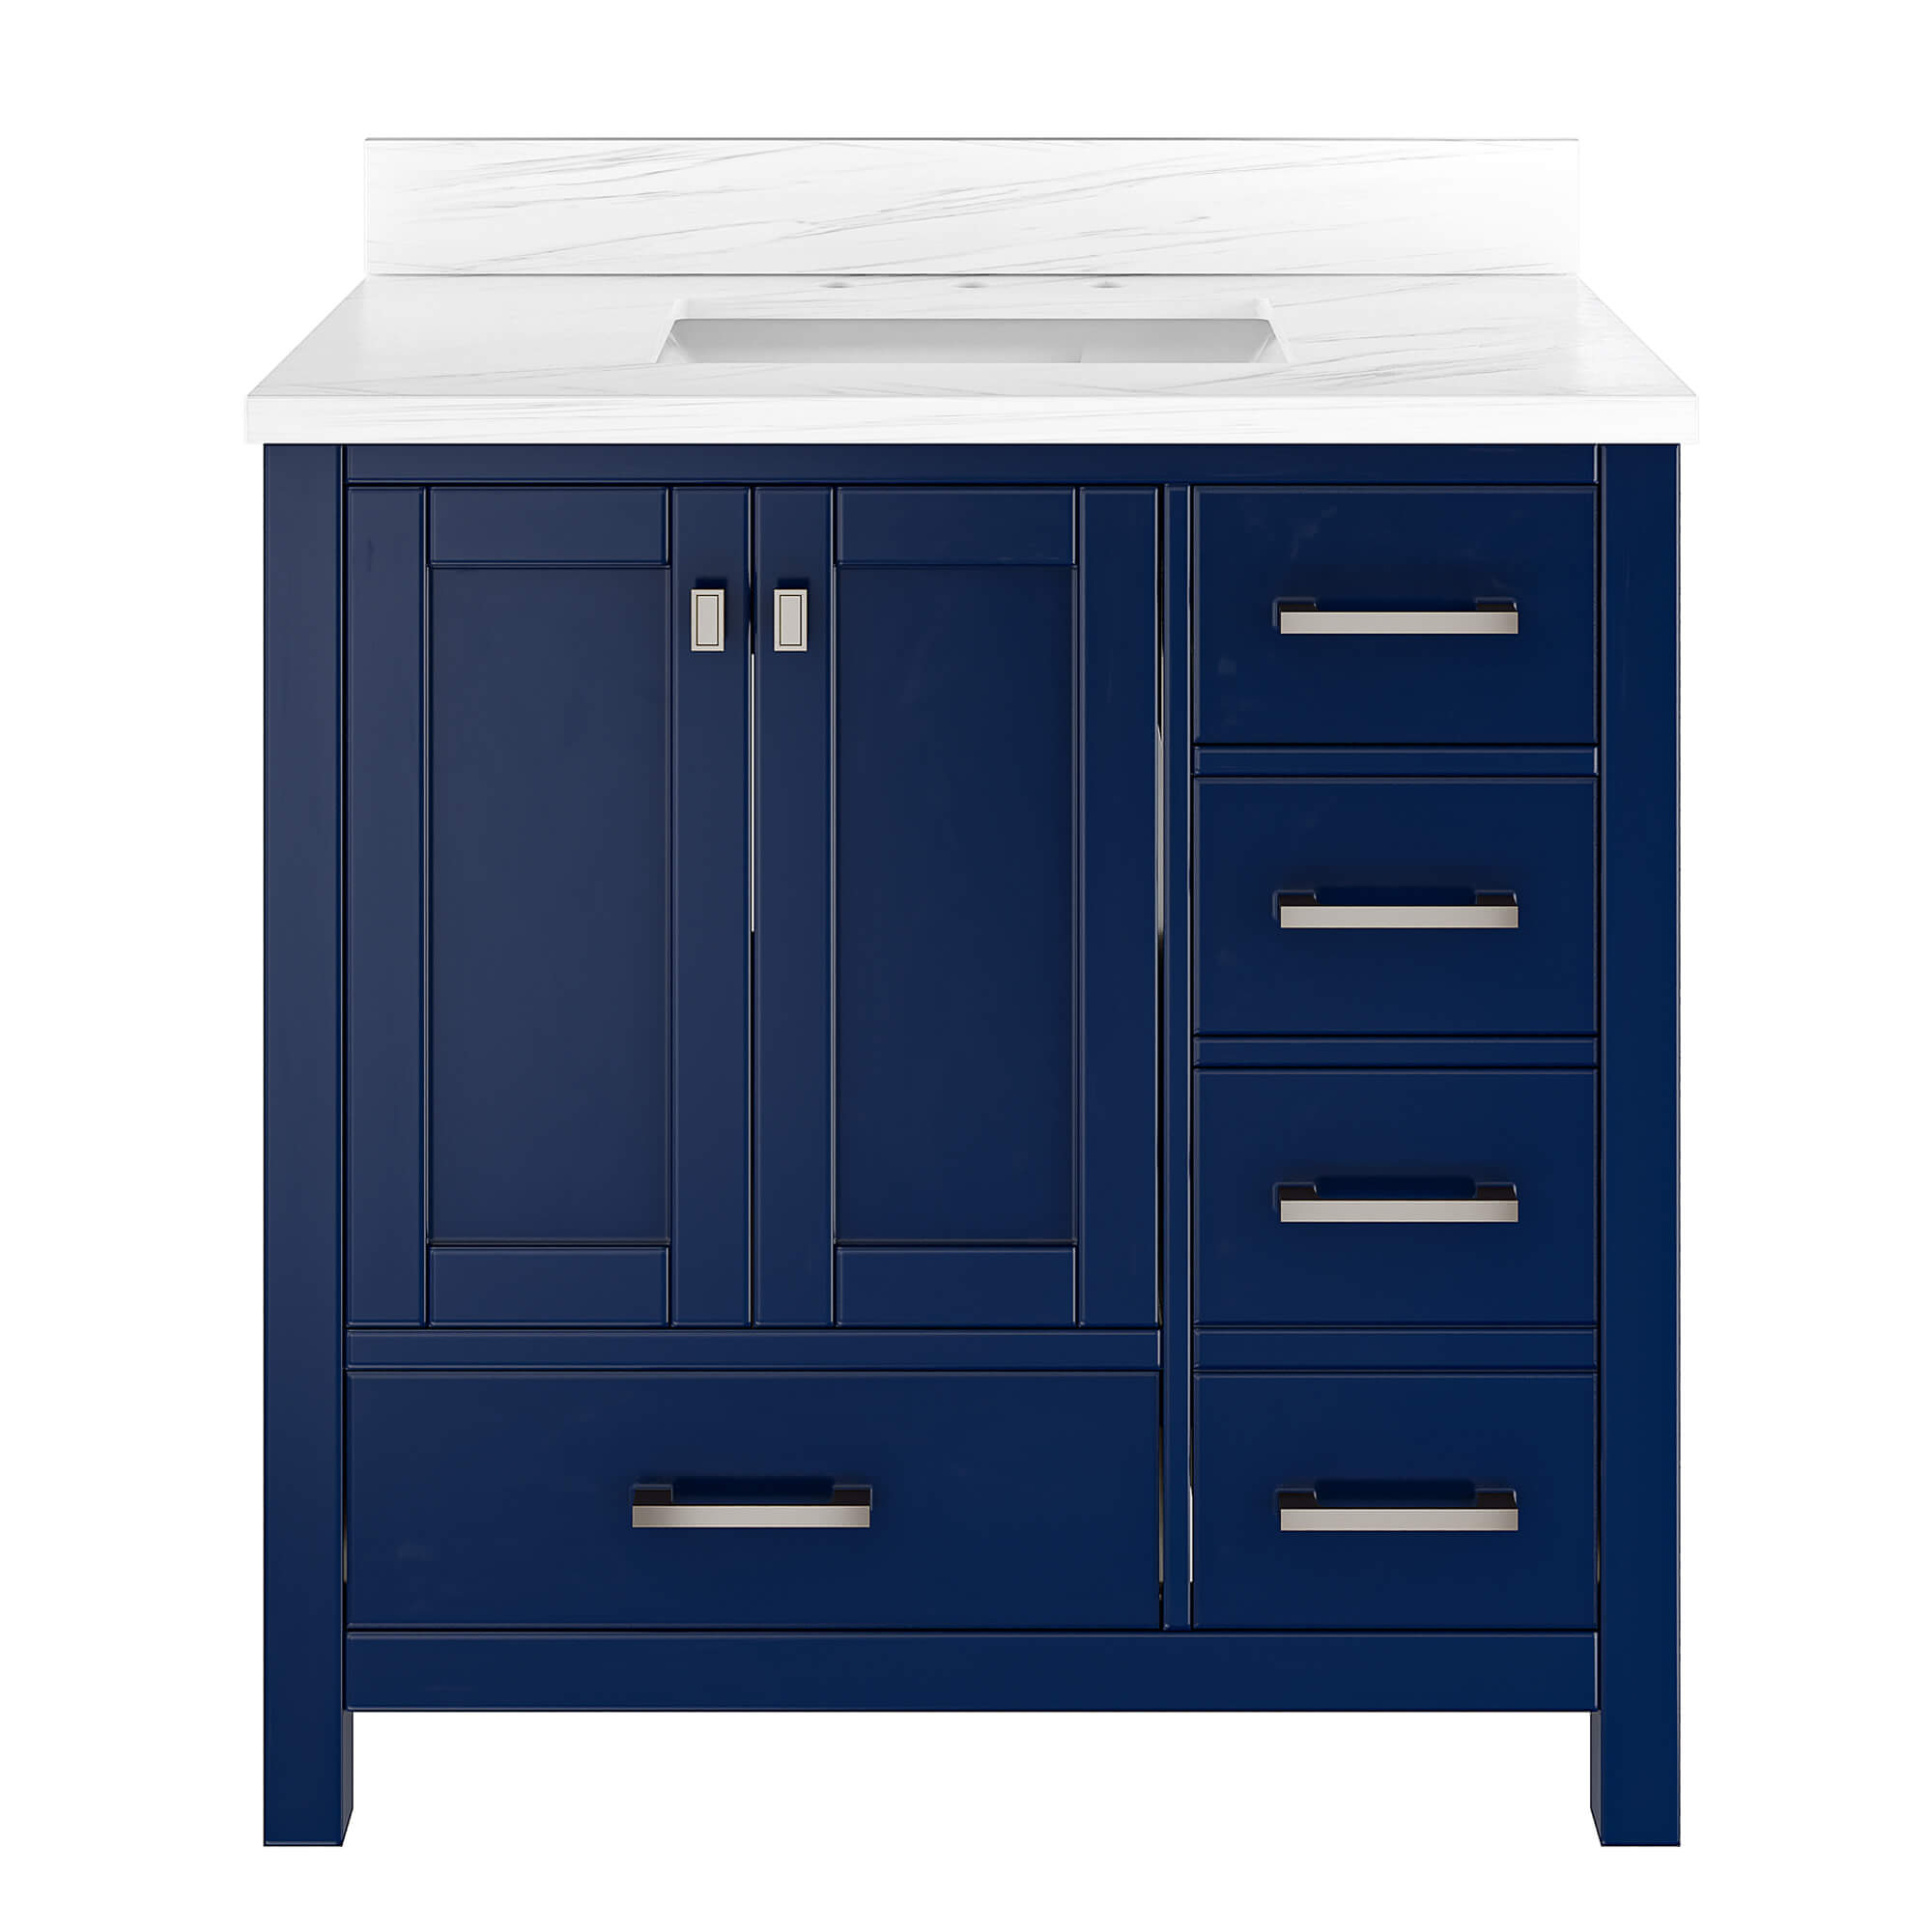 CASAINC 36 x 22 x 35.4 in. Solid Wood Navy Blue Bath Vanity with Carrara White Marble Countertop (No/With Mirror)